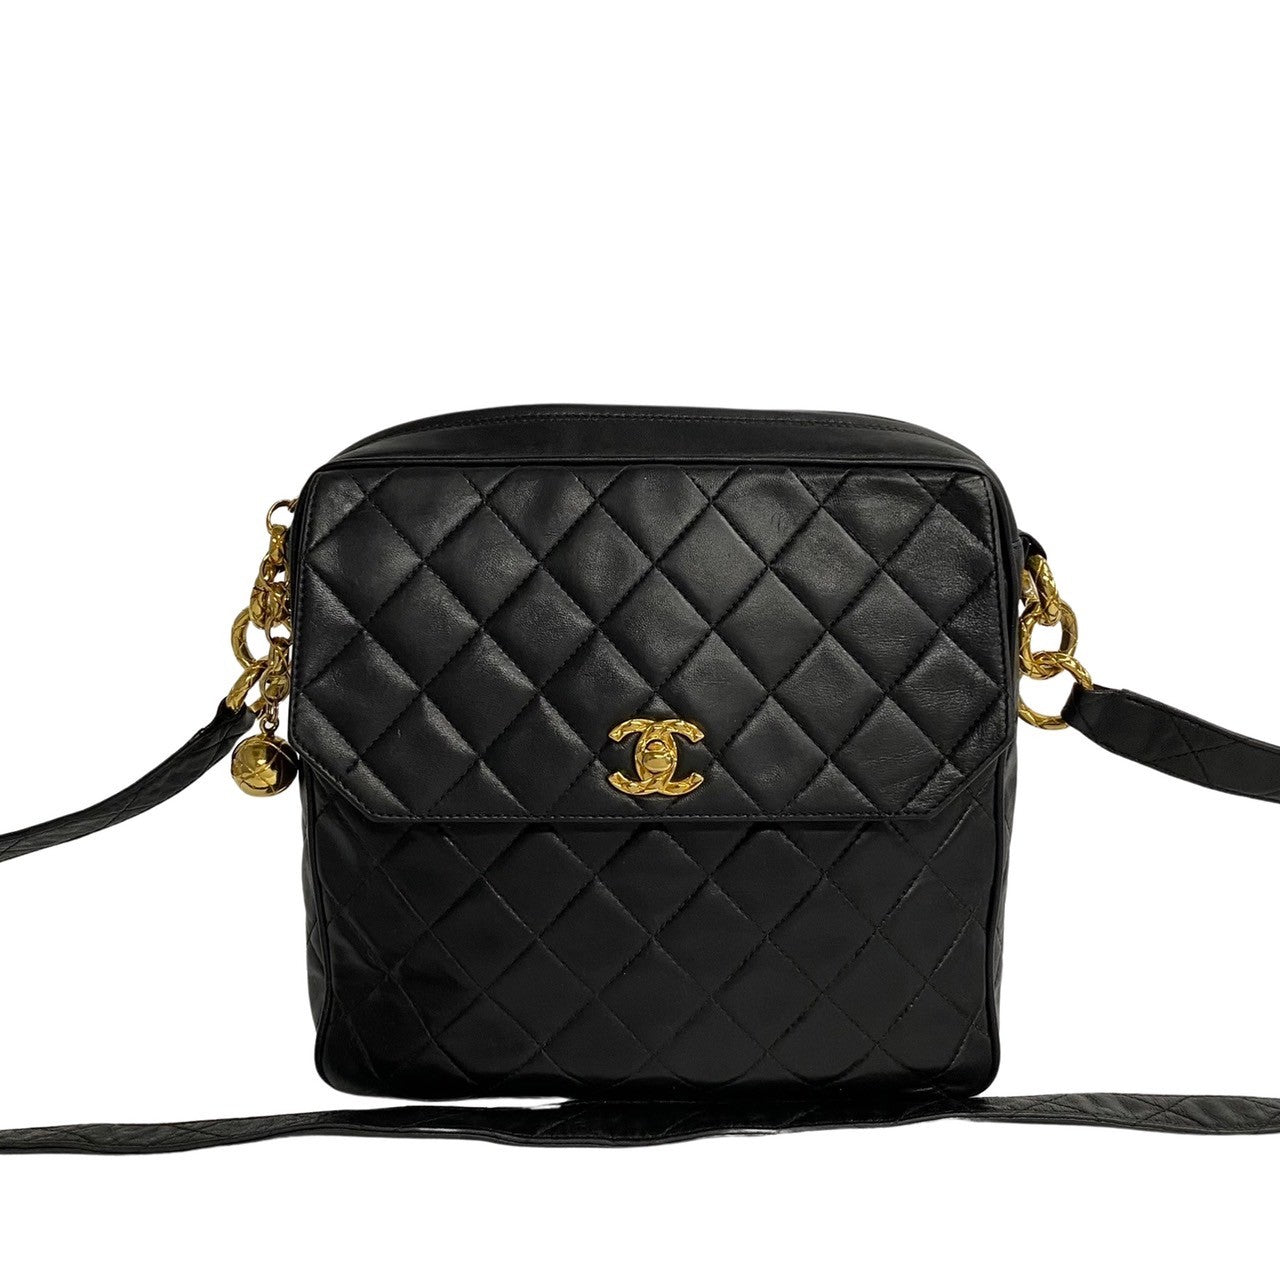 CC Quilted Leather Zip Messenger Bag